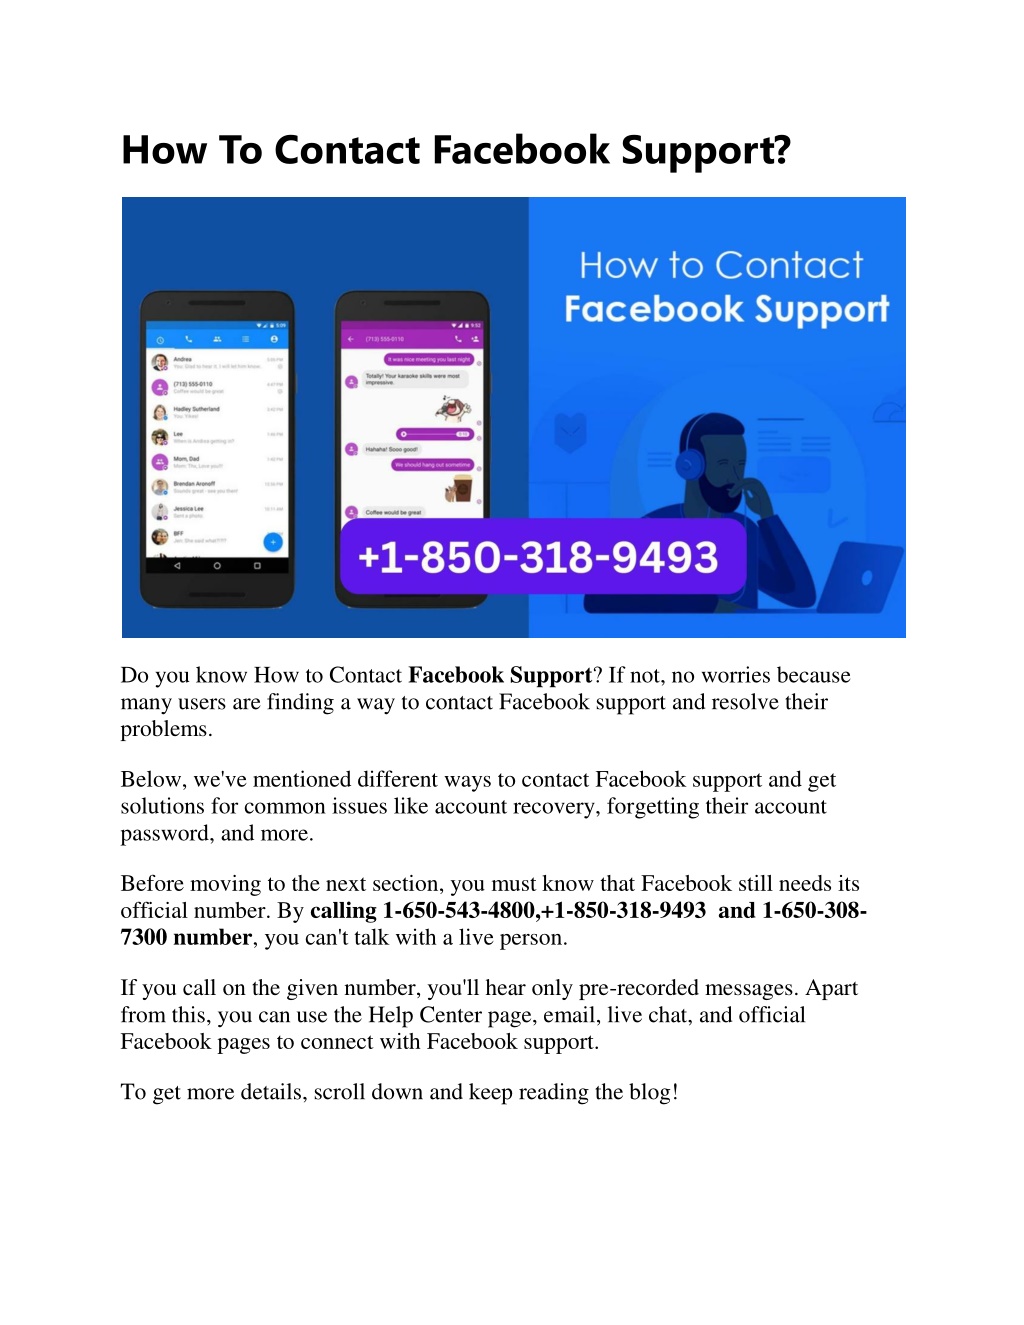 Can't connect to Facebook